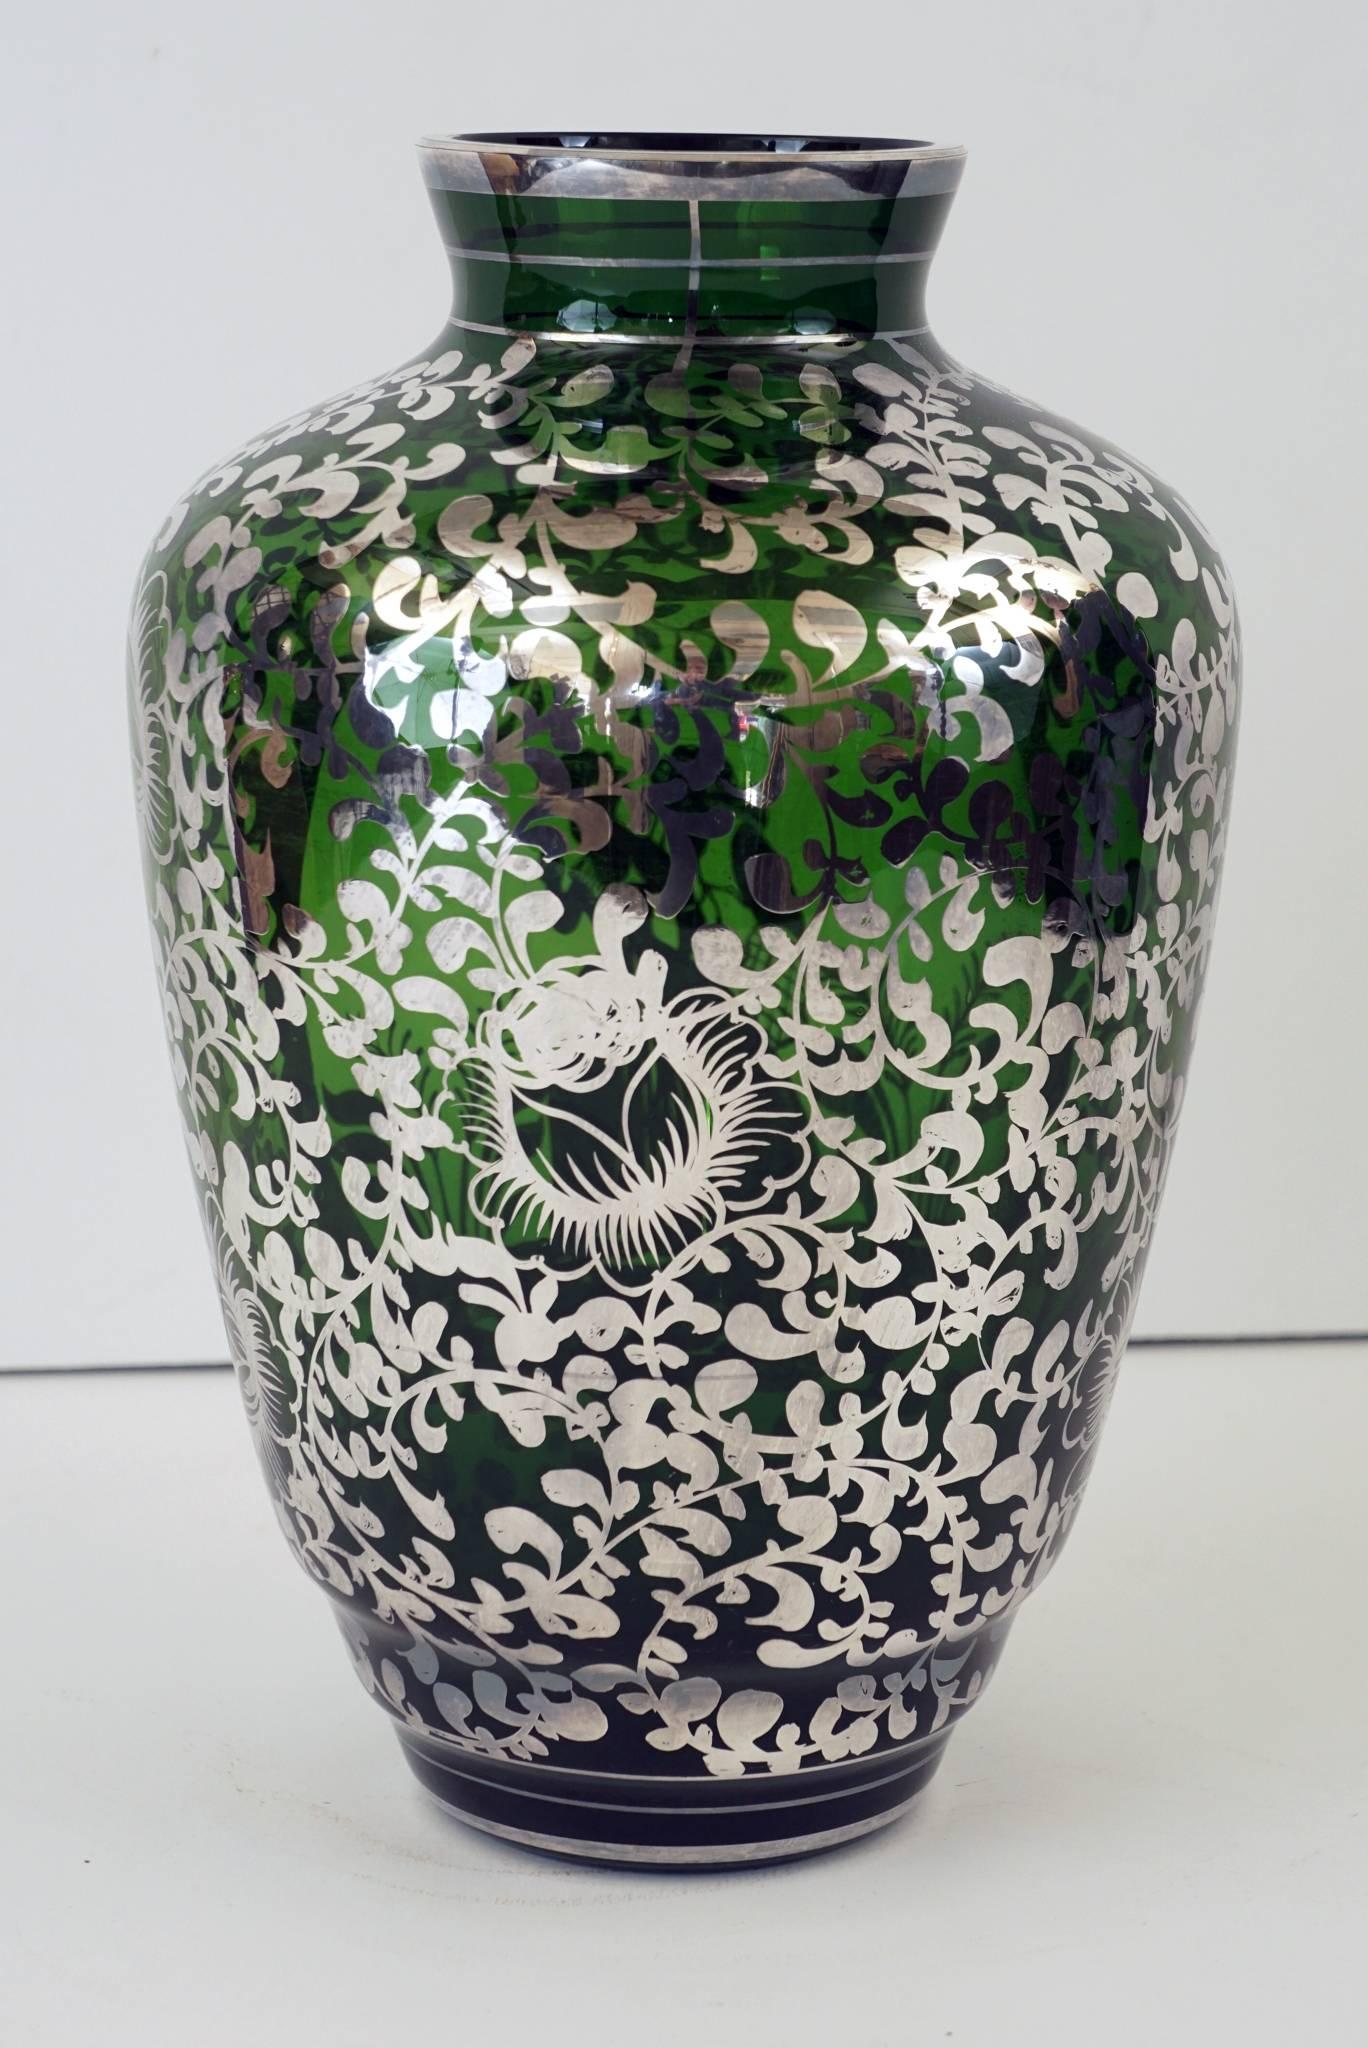 North American Silver Overlay Blown Green Glass Vase From the Estate Of Bunny Mellon